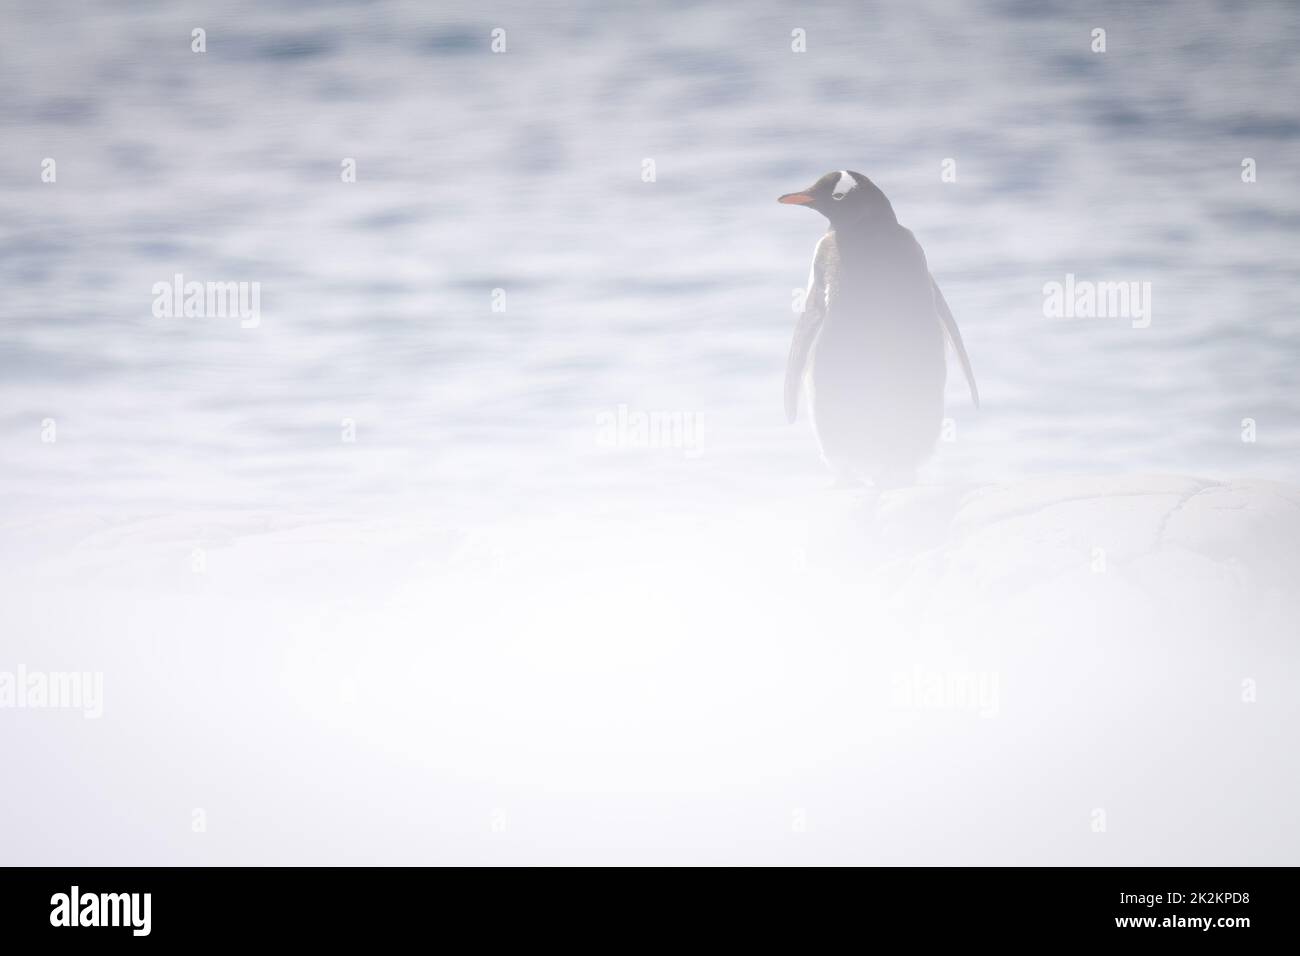 Gentoo penguin stands turning left in snowstorm Stock Photo